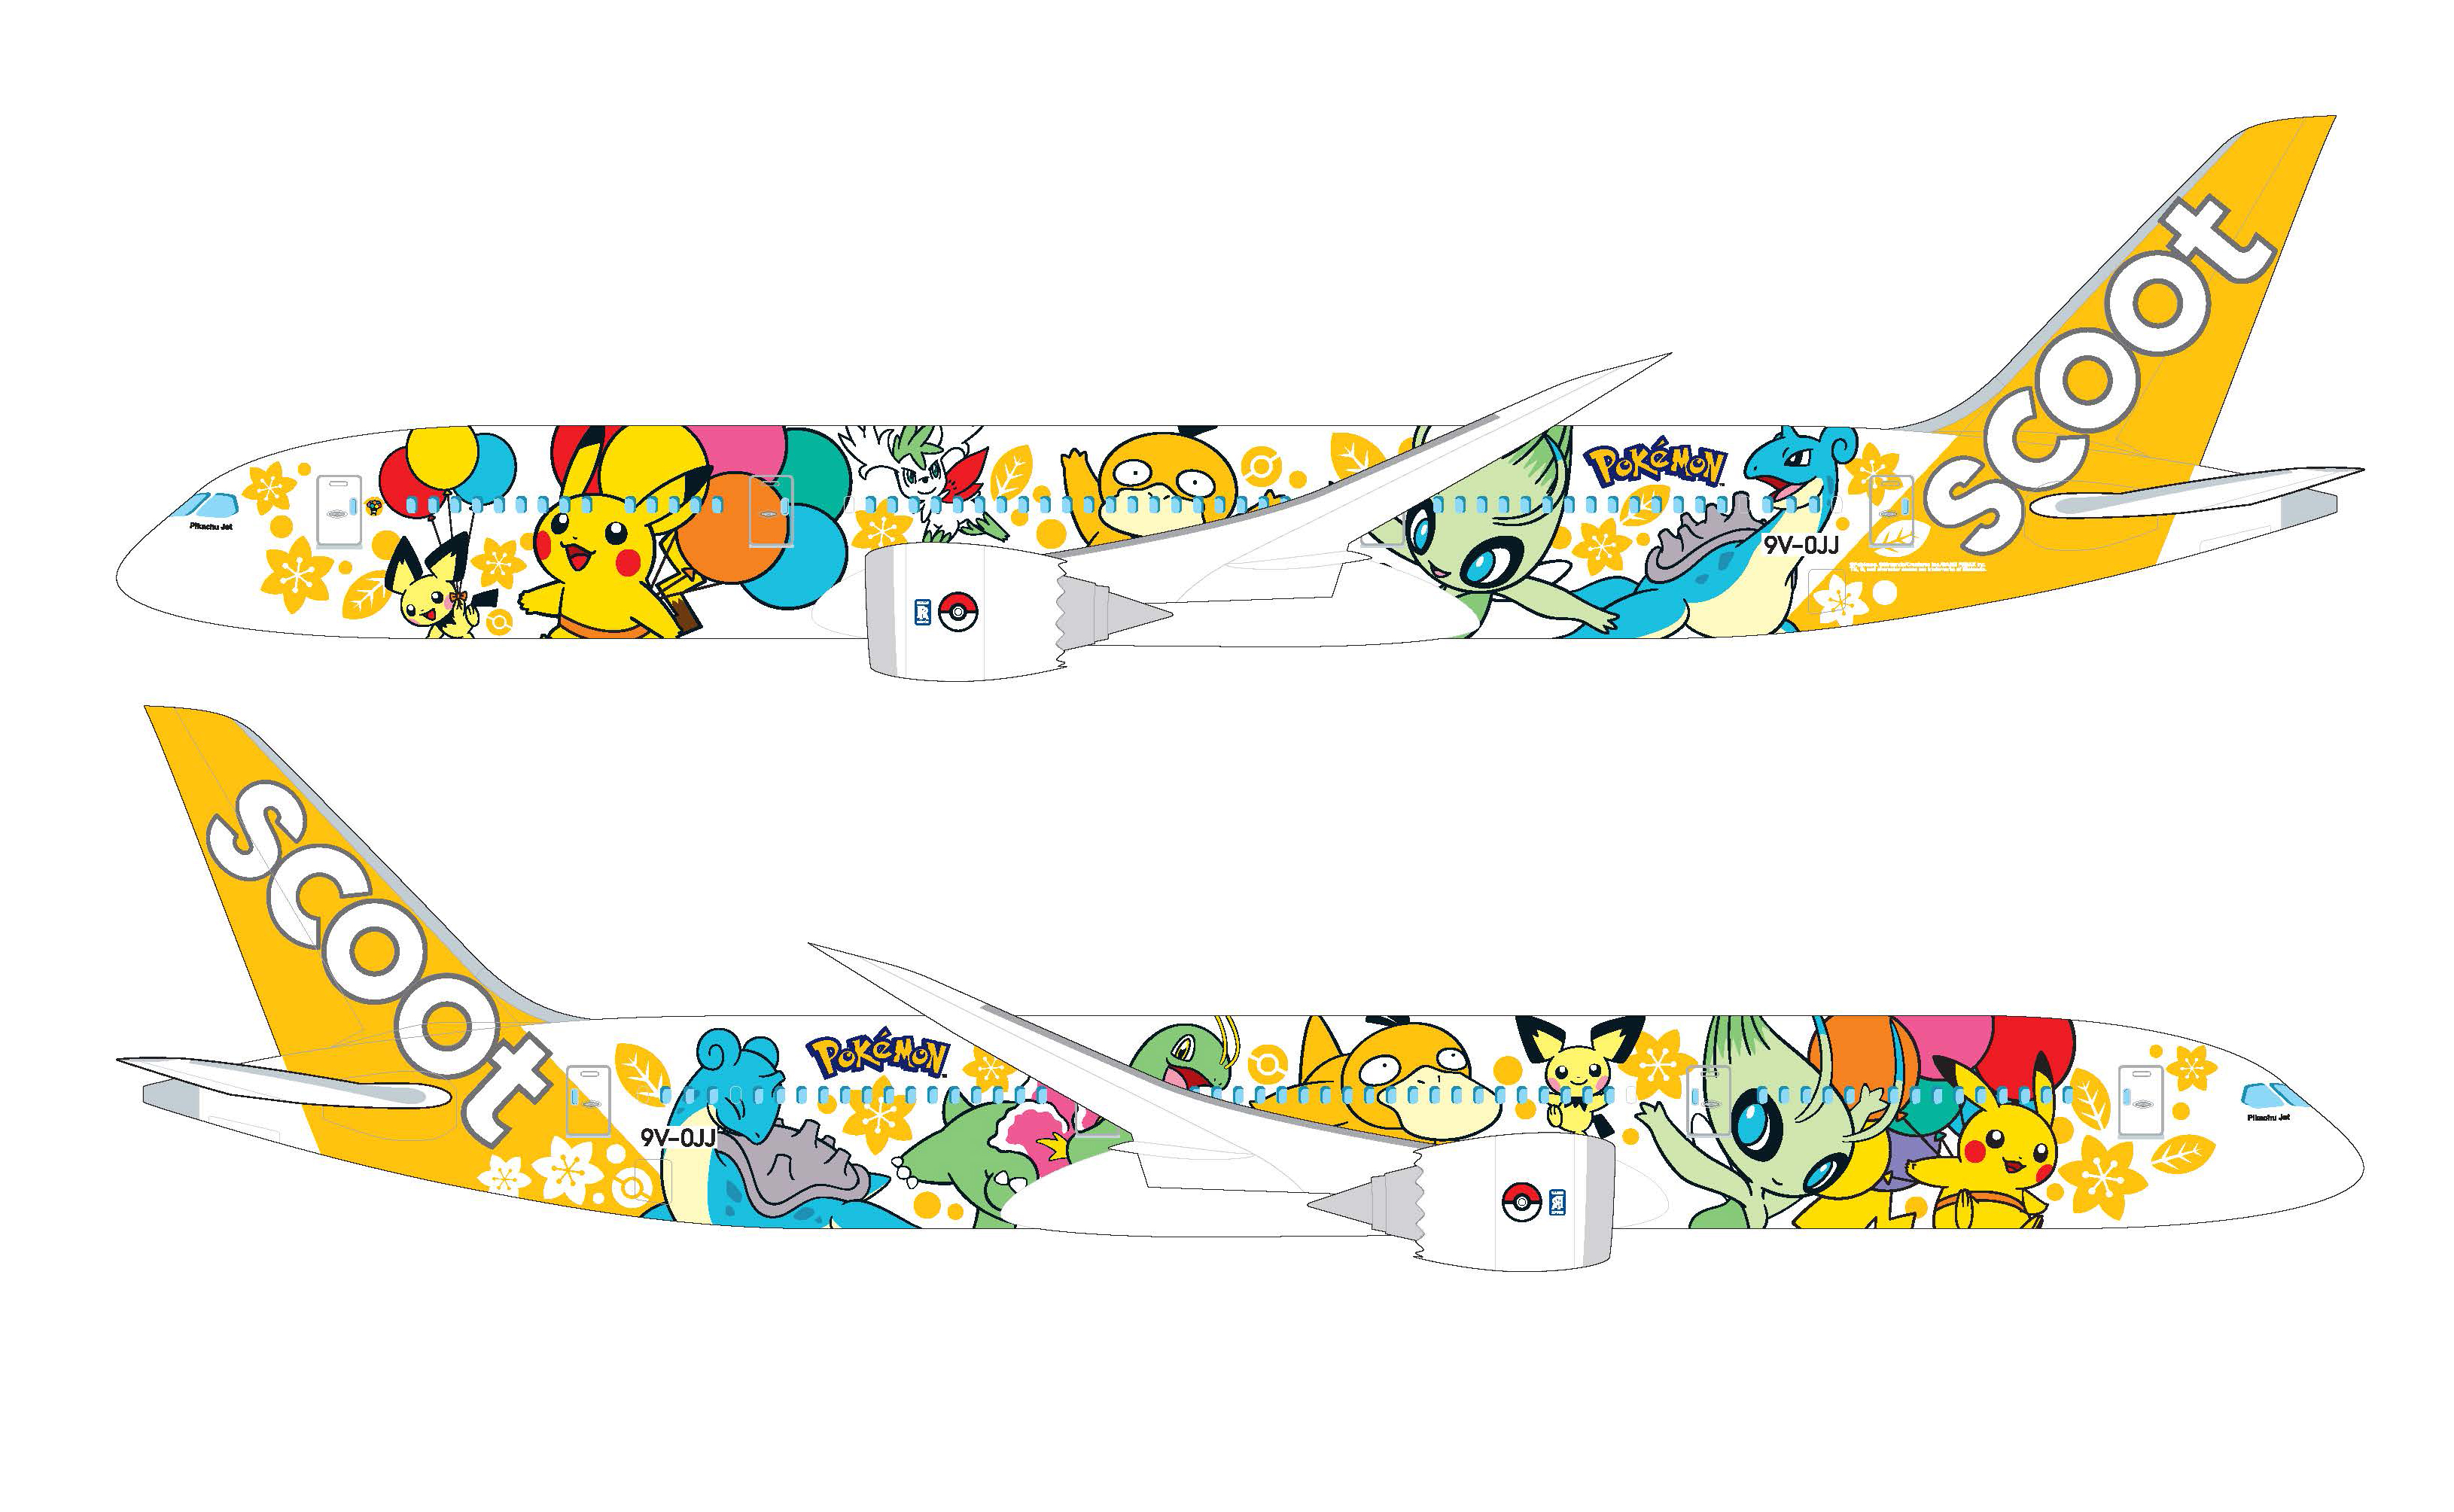 AirAdventures_Scoot_PikachuJetTR_Livery.jpg